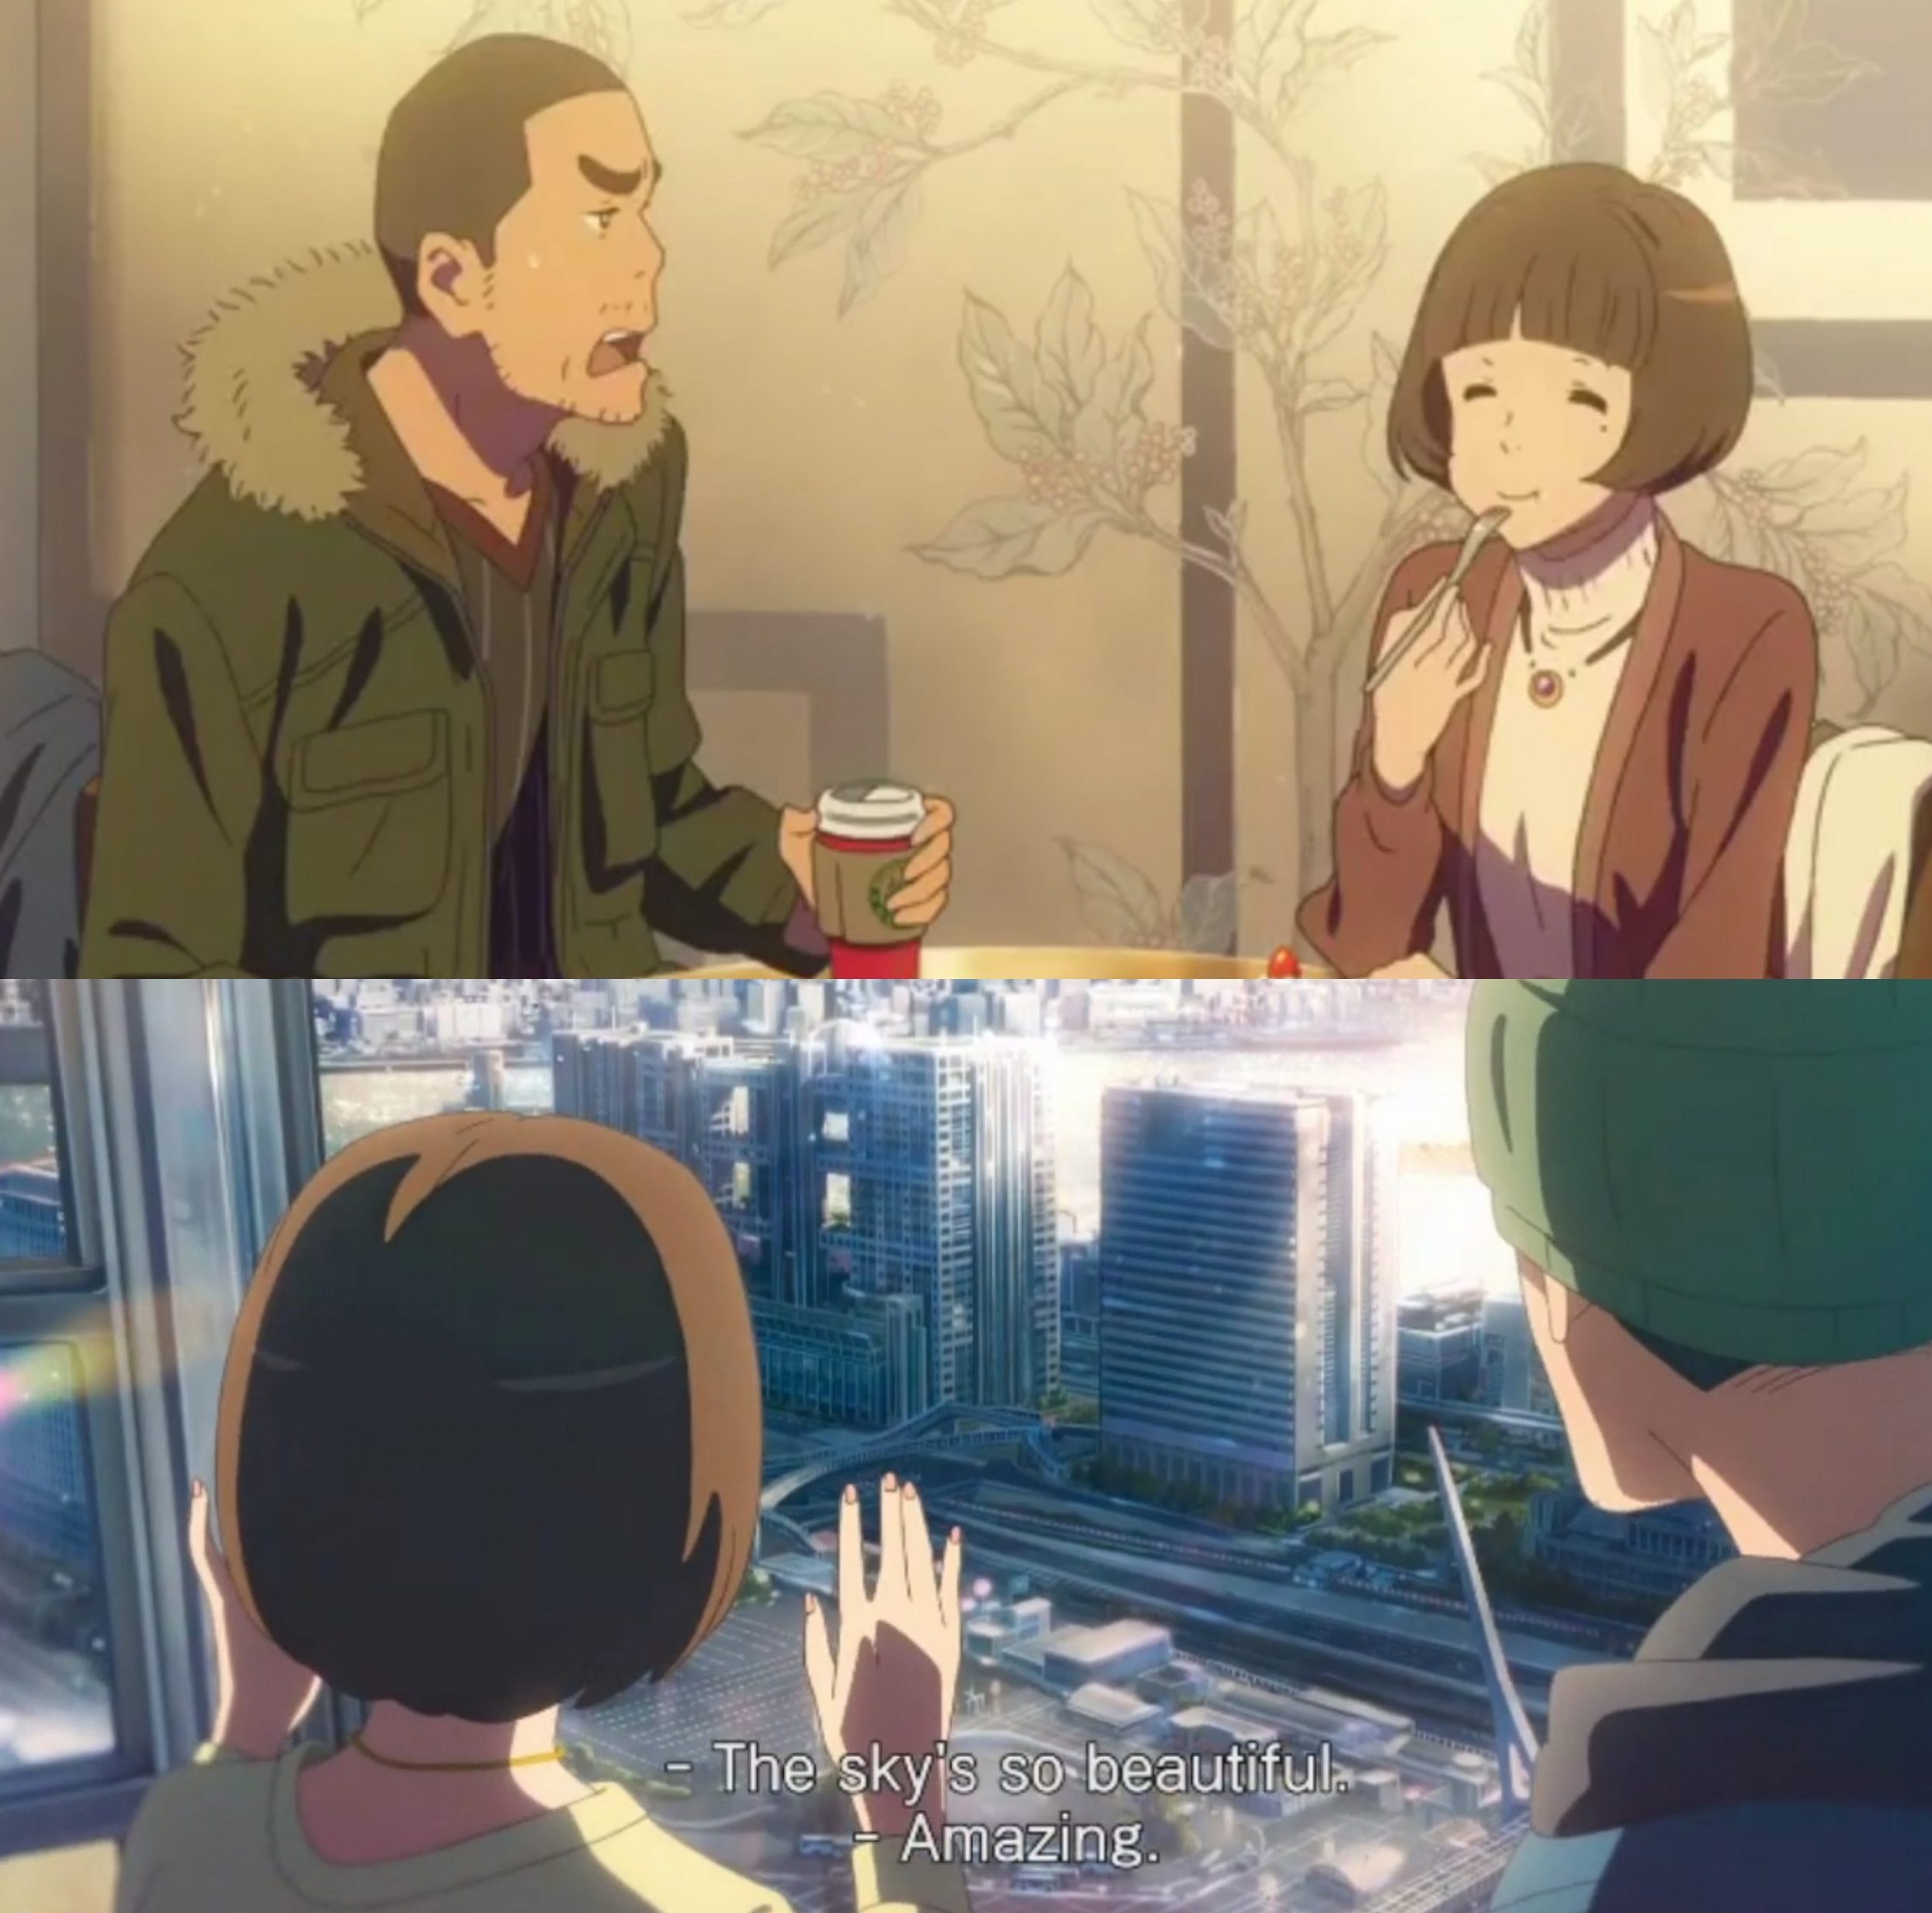 The Connection Between The Garden Of Words Your Name And Weathering With You Explained Otakukart